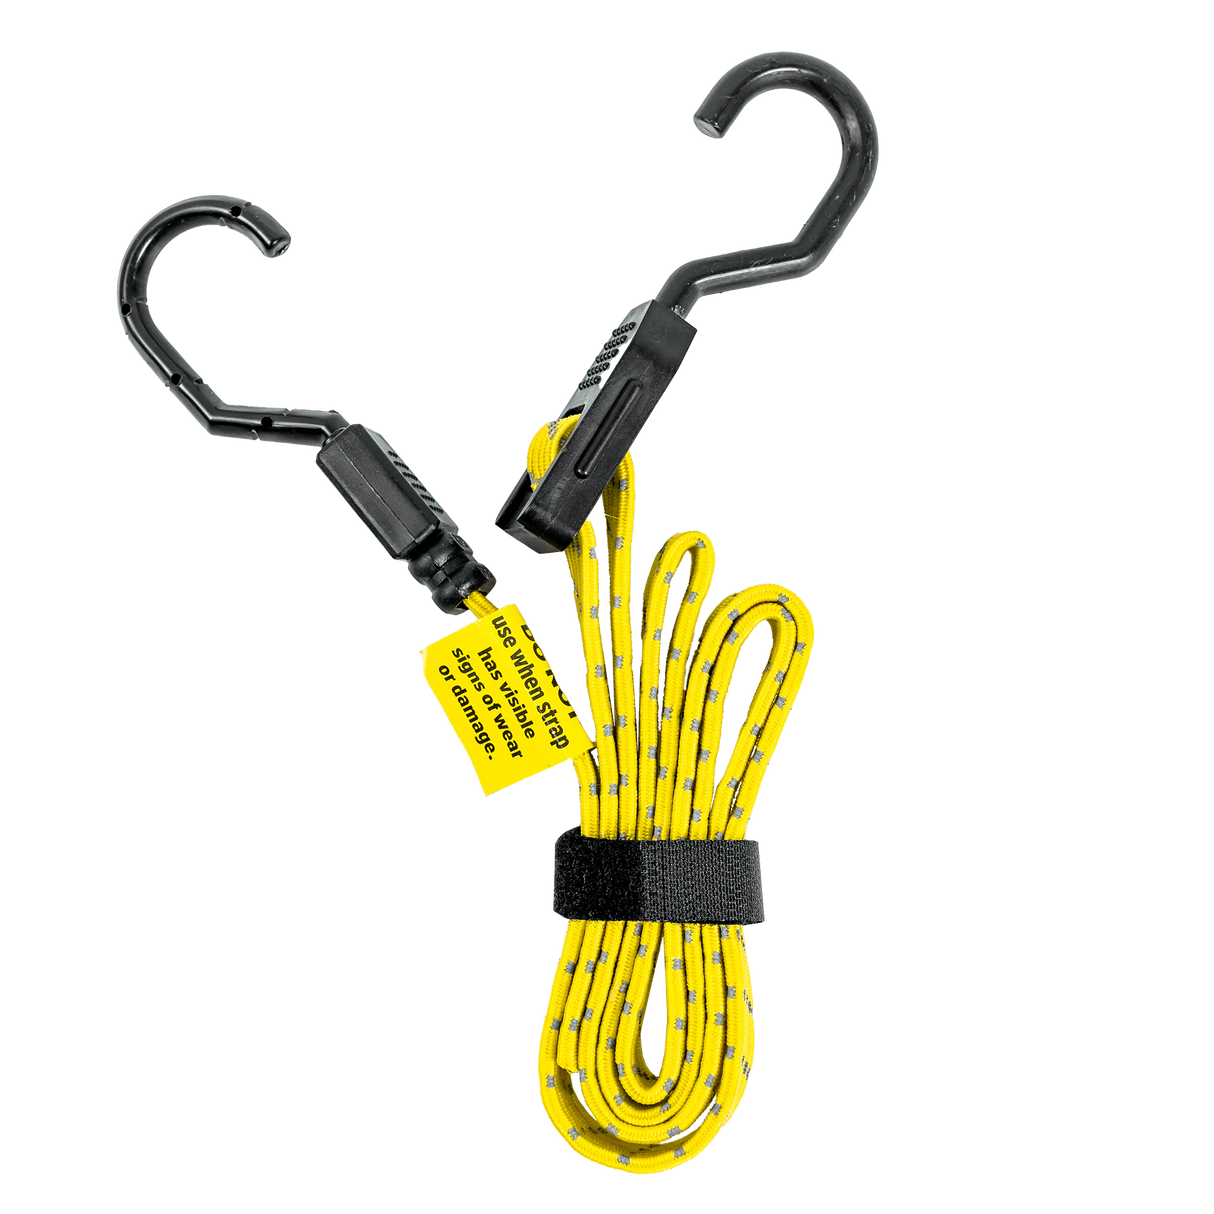 CAOS 1.2m Flat Adjustable Bungee Cord